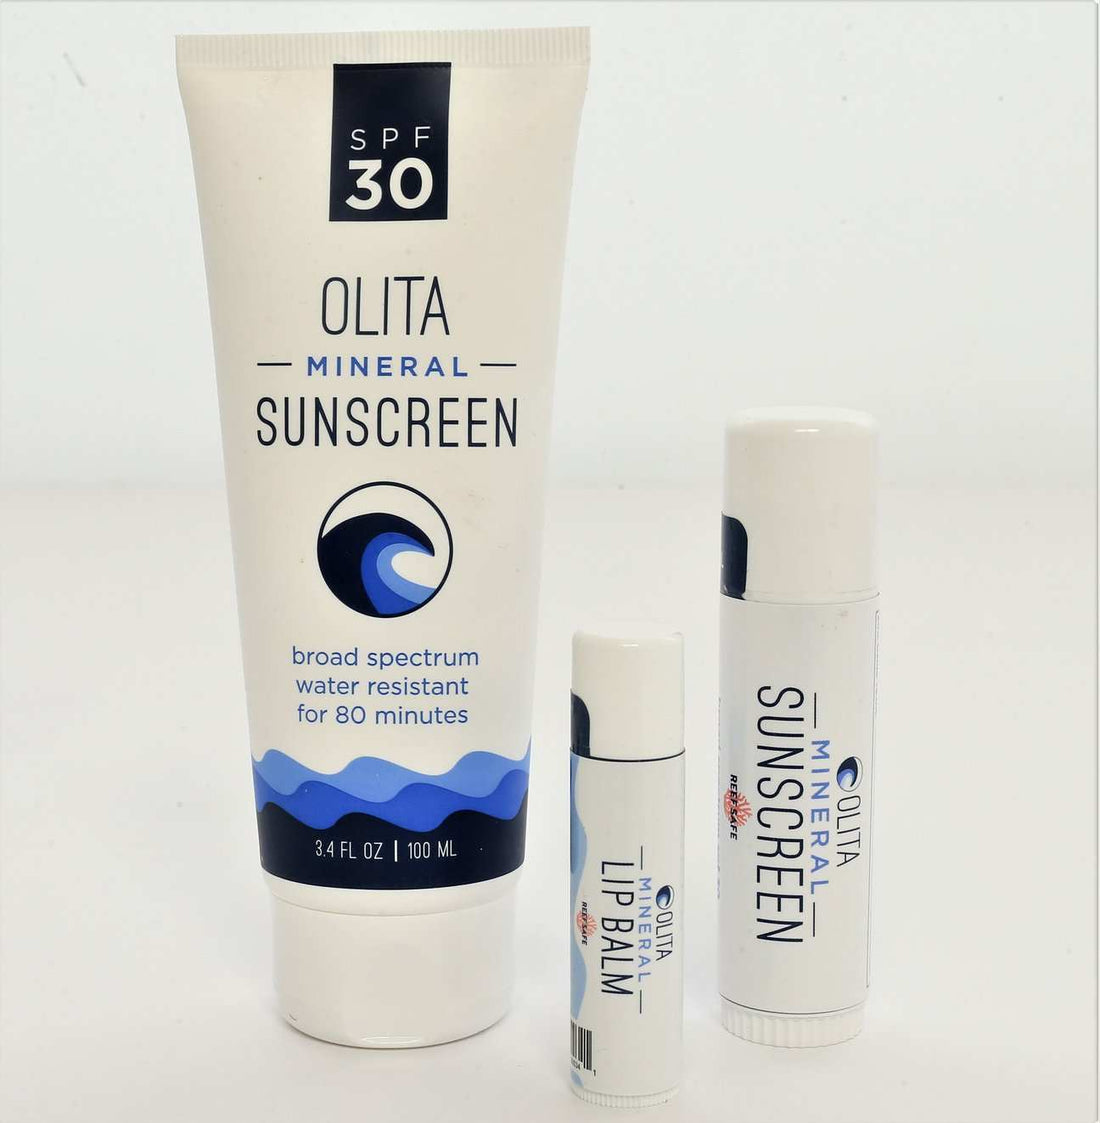 How safe is your sunscreen? - OLITA